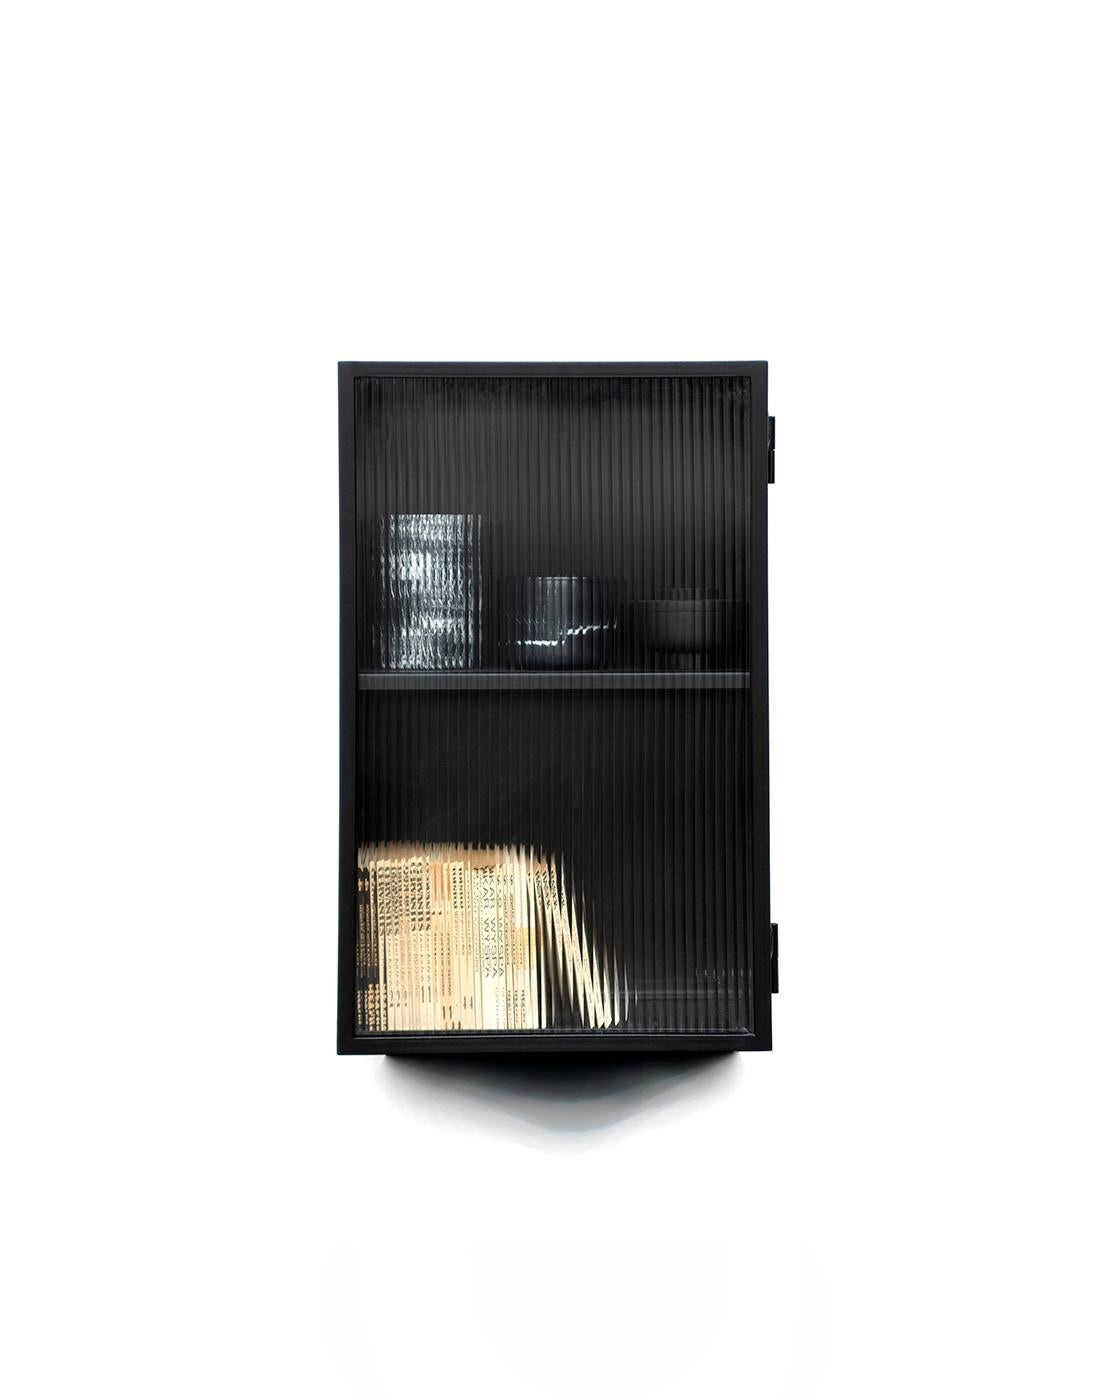 Polish Object 028 Cabinet by NG Design